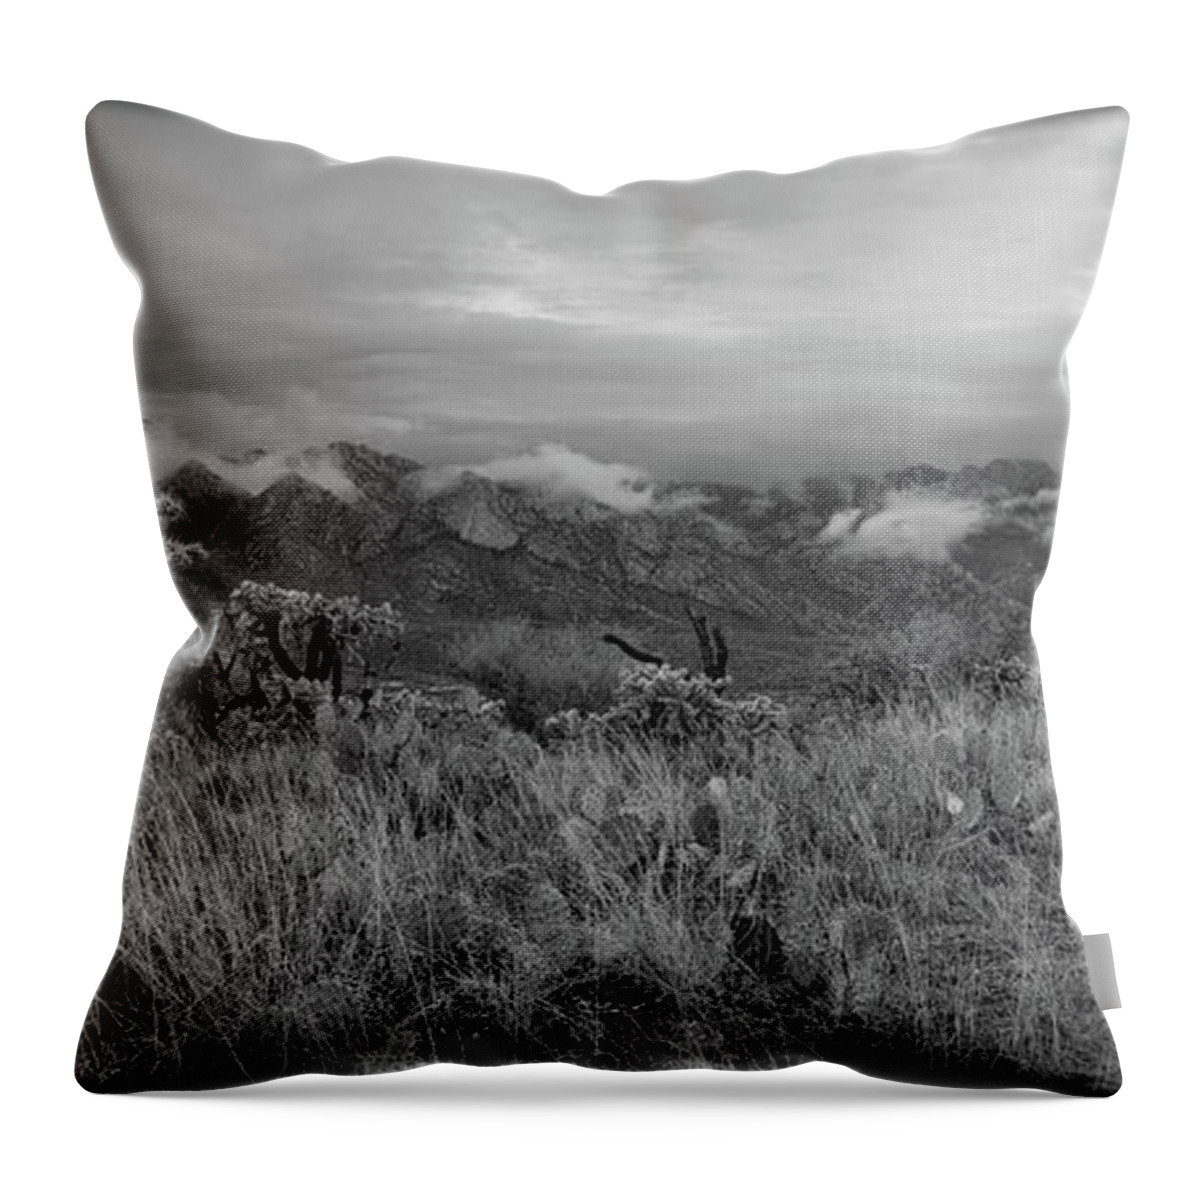 Mountains Throw Pillow featuring the photograph 12-26-18 Snow Storm by Elaine Malott